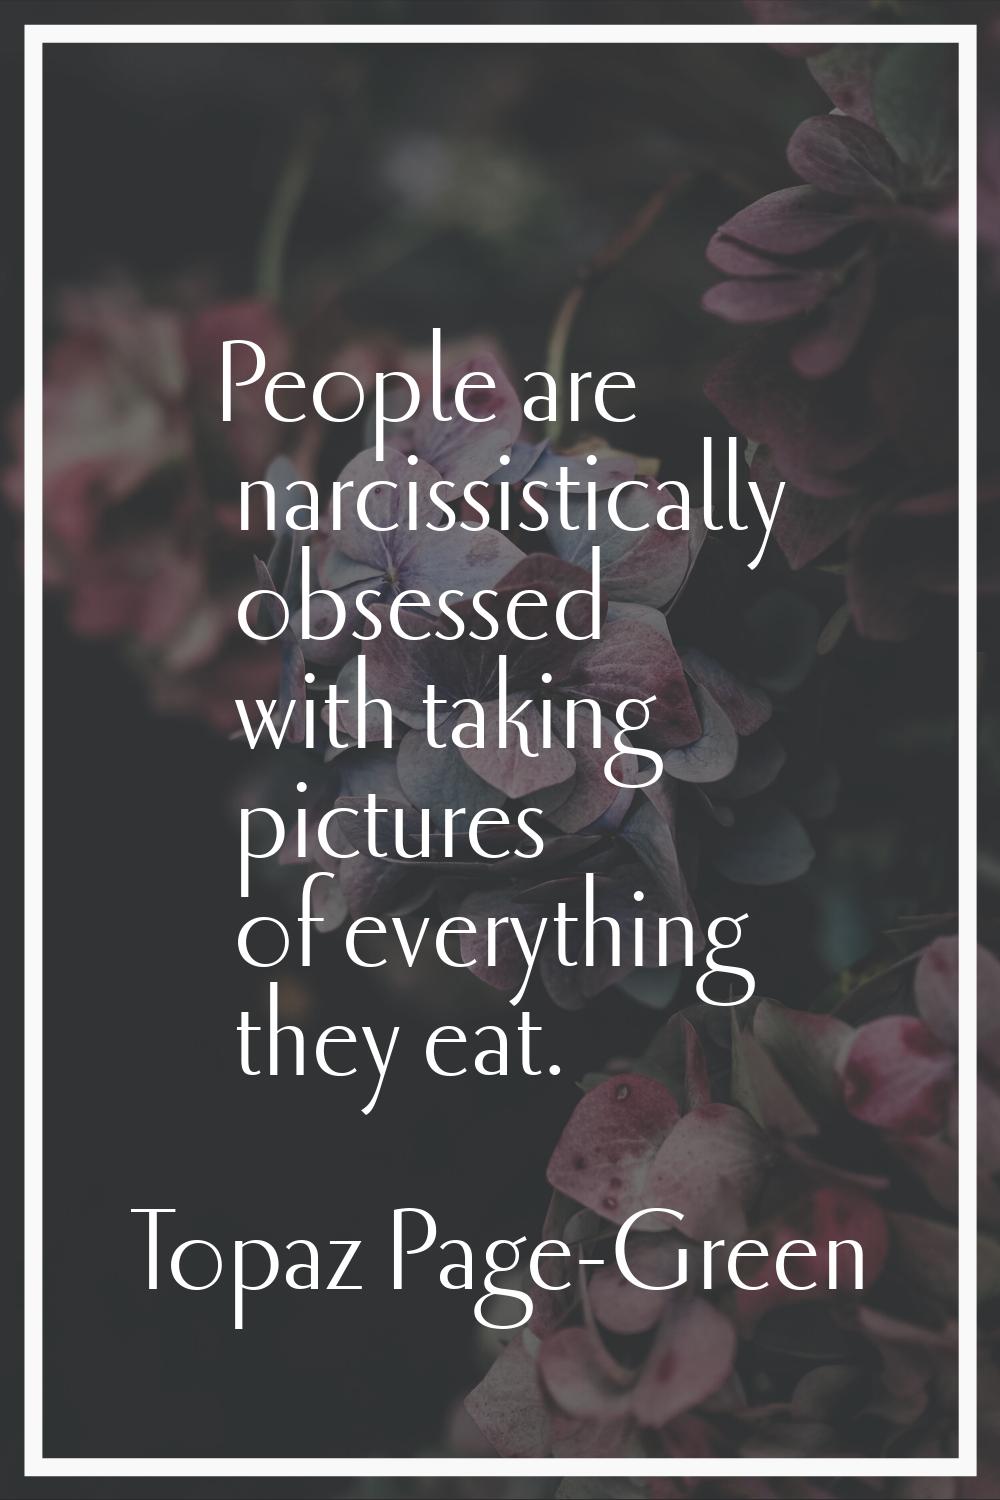 People are narcissistically obsessed with taking pictures of everything they eat.